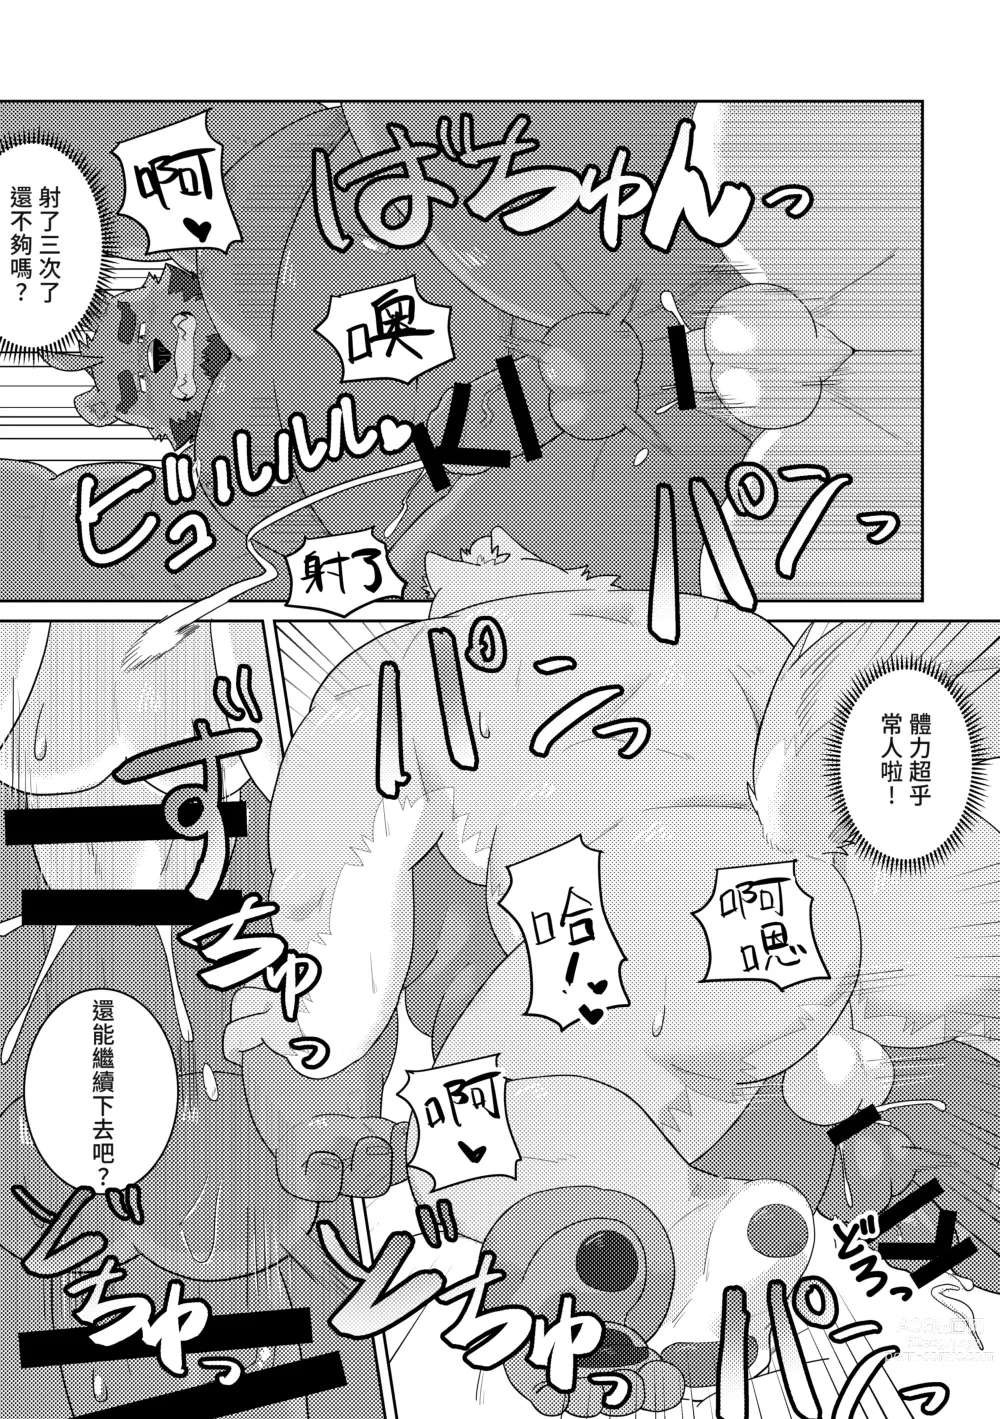 Page 25 of doujinshi 幽靈戀人